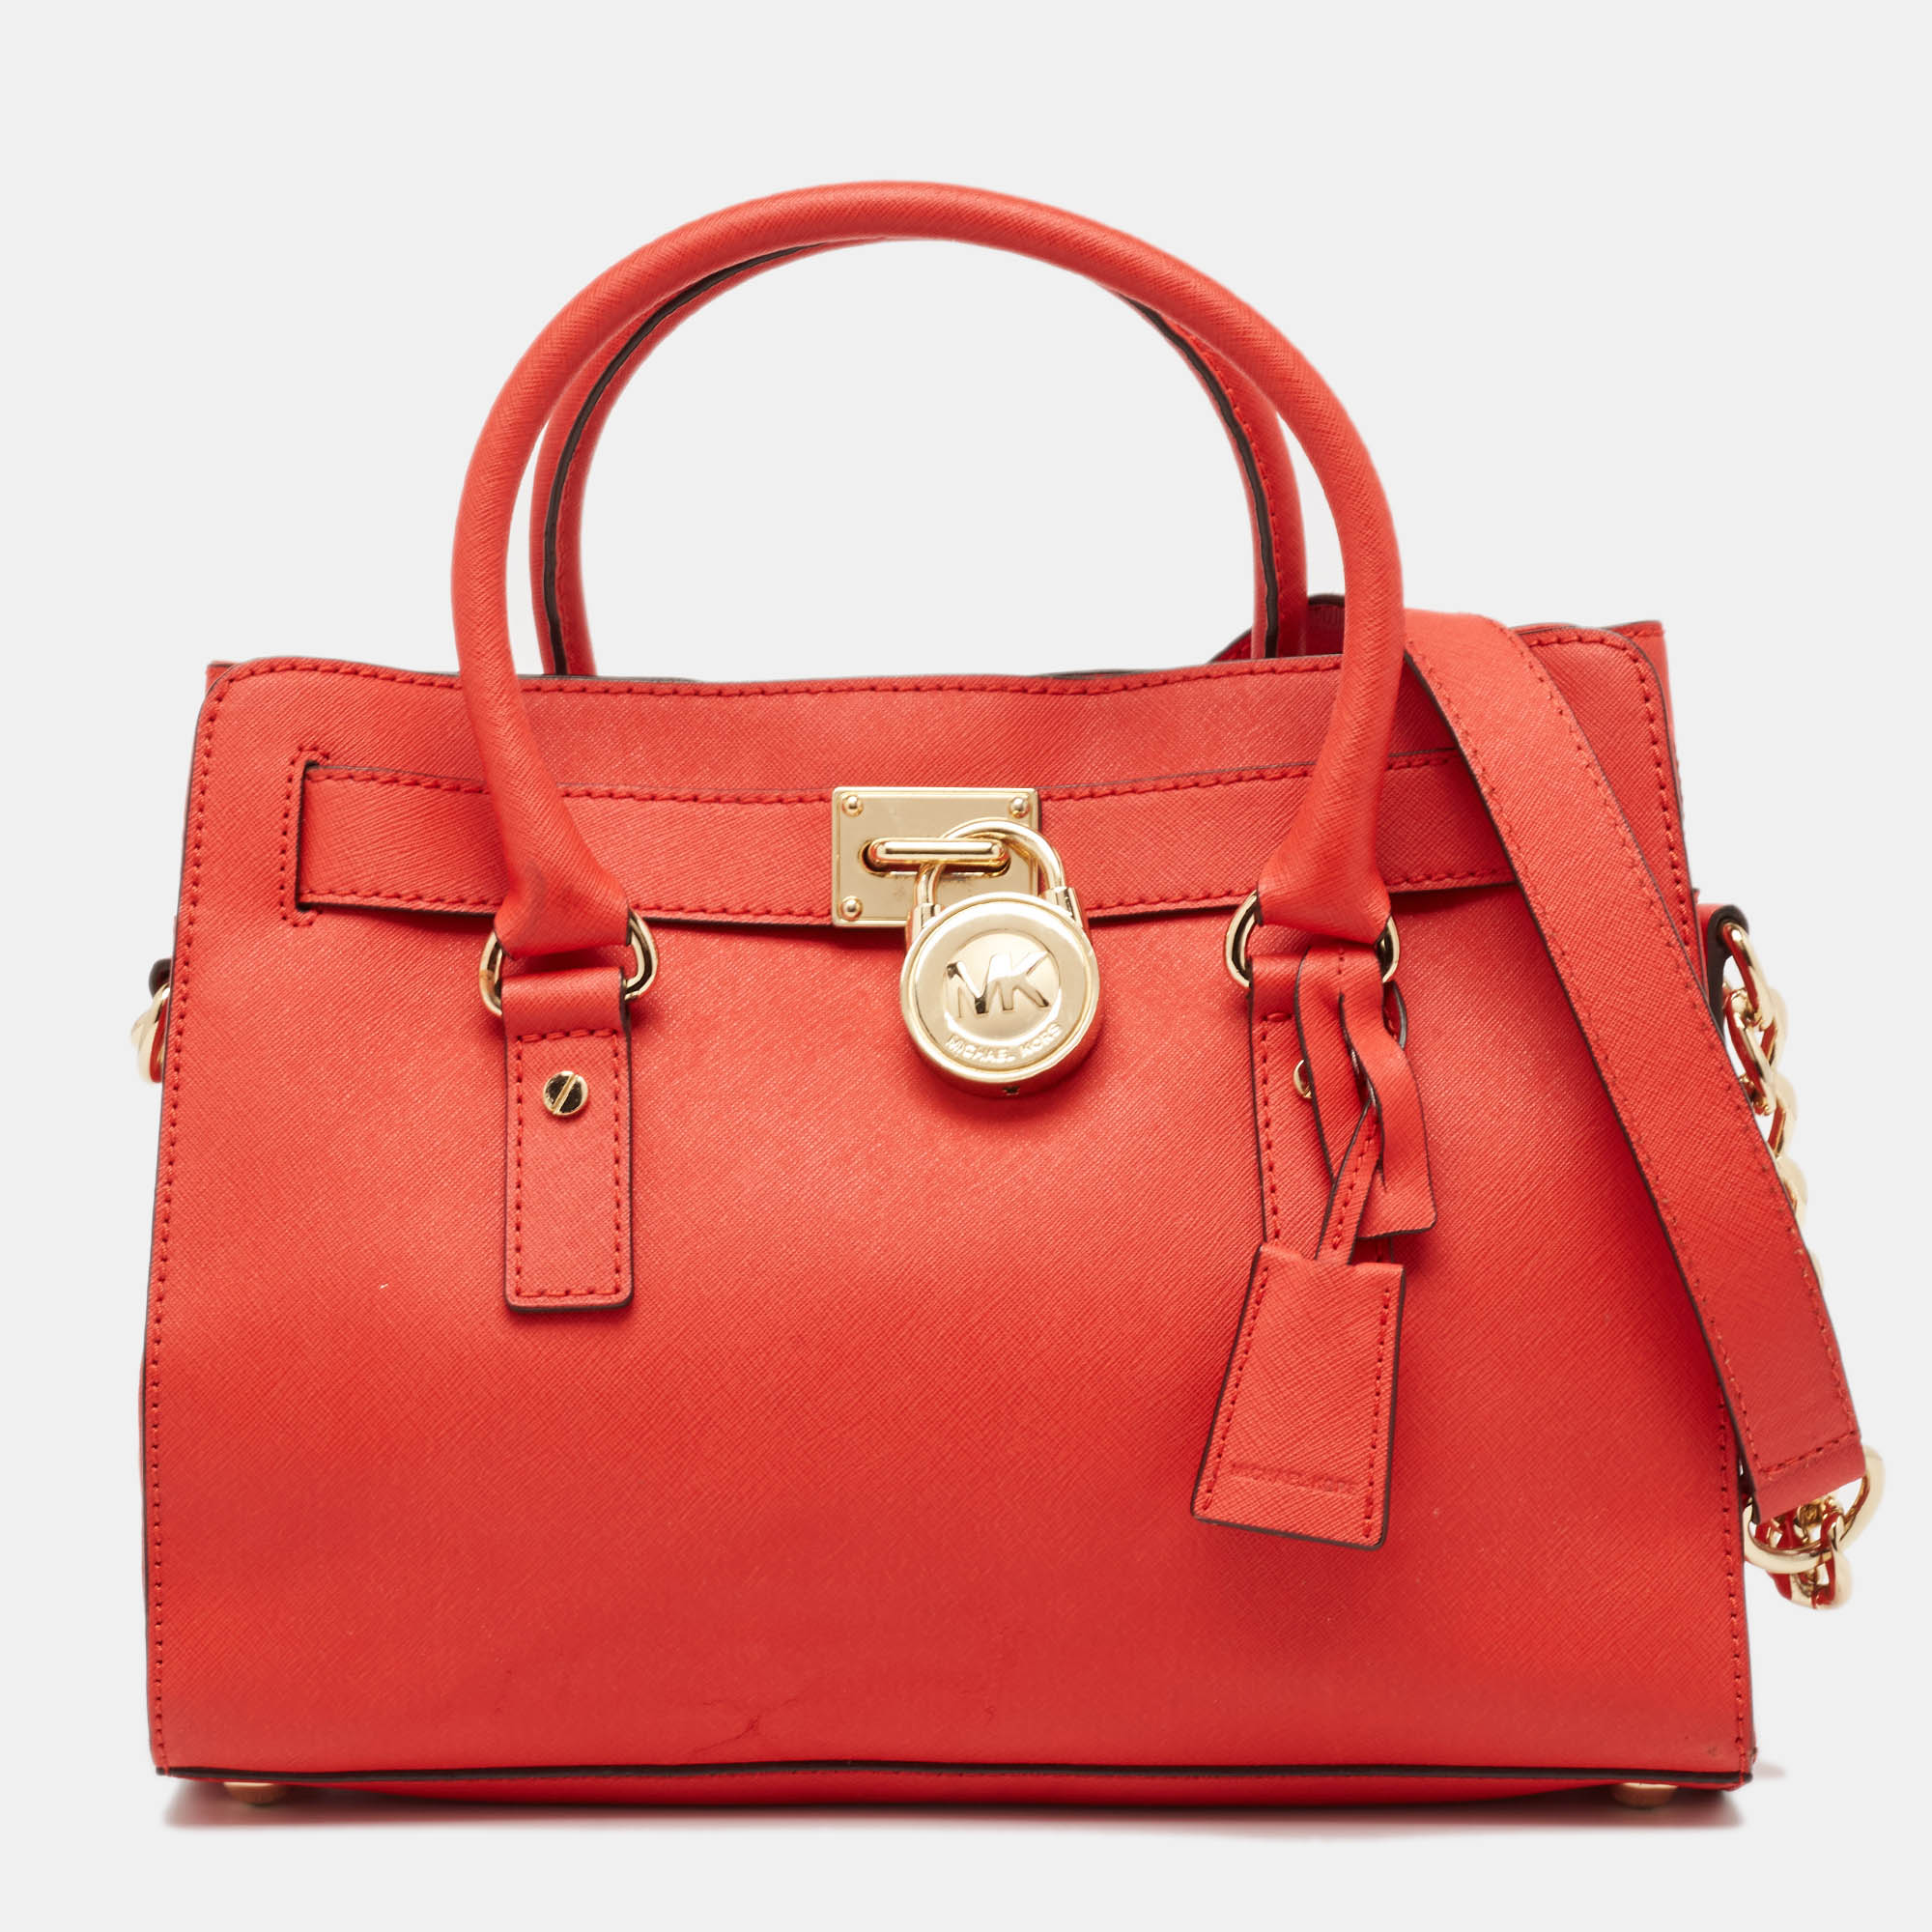 Michael kors red saffiano leather east/west hamilton tote